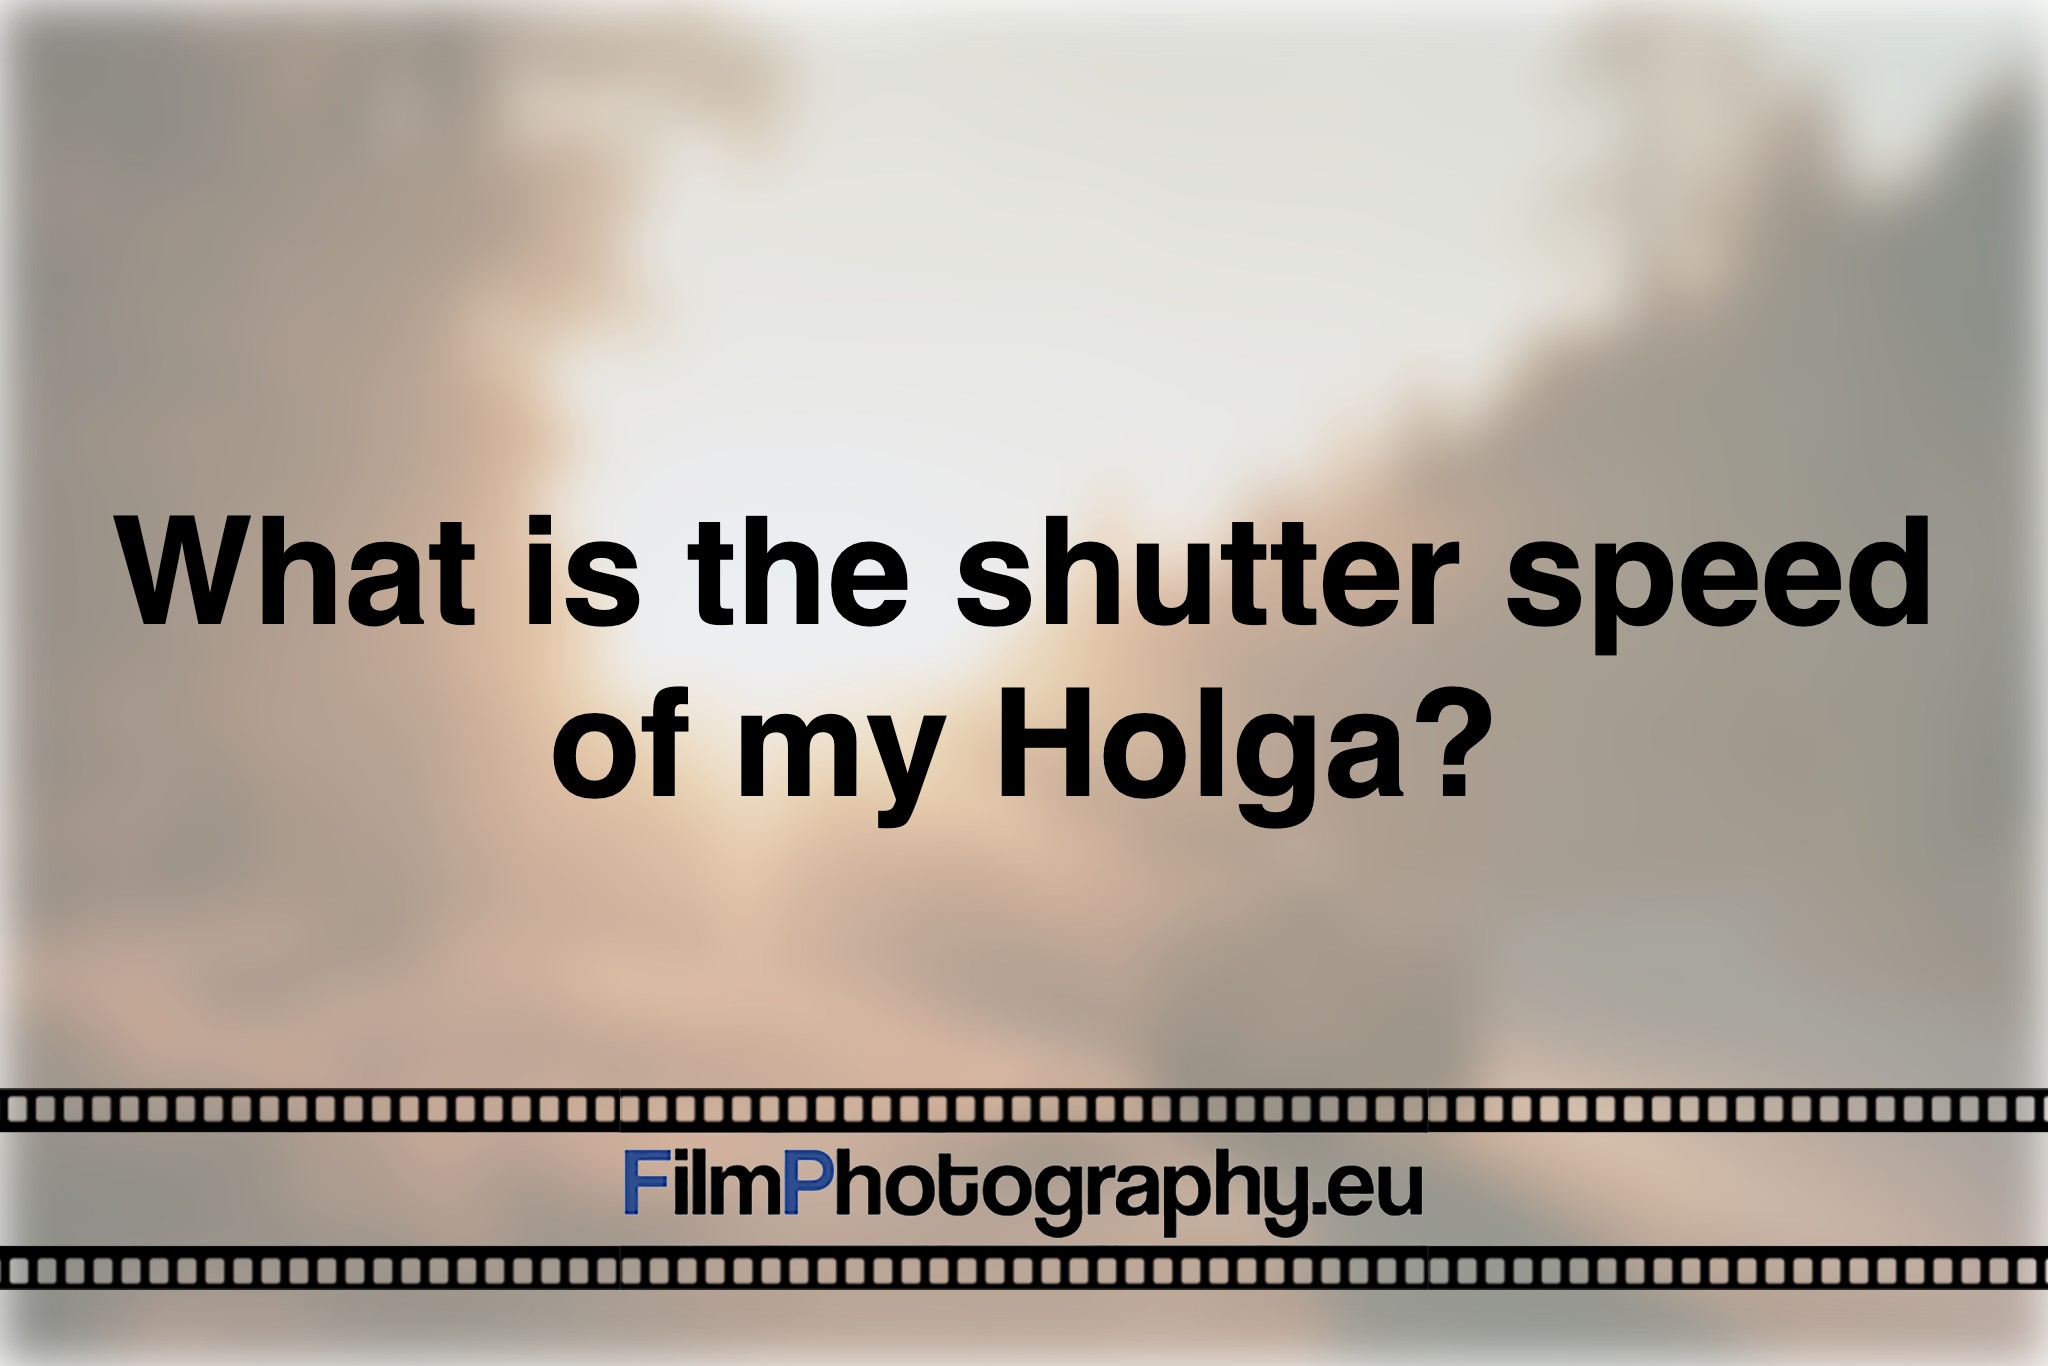 what-is-the-shutter-speed-of-my-holga-photo-bnv